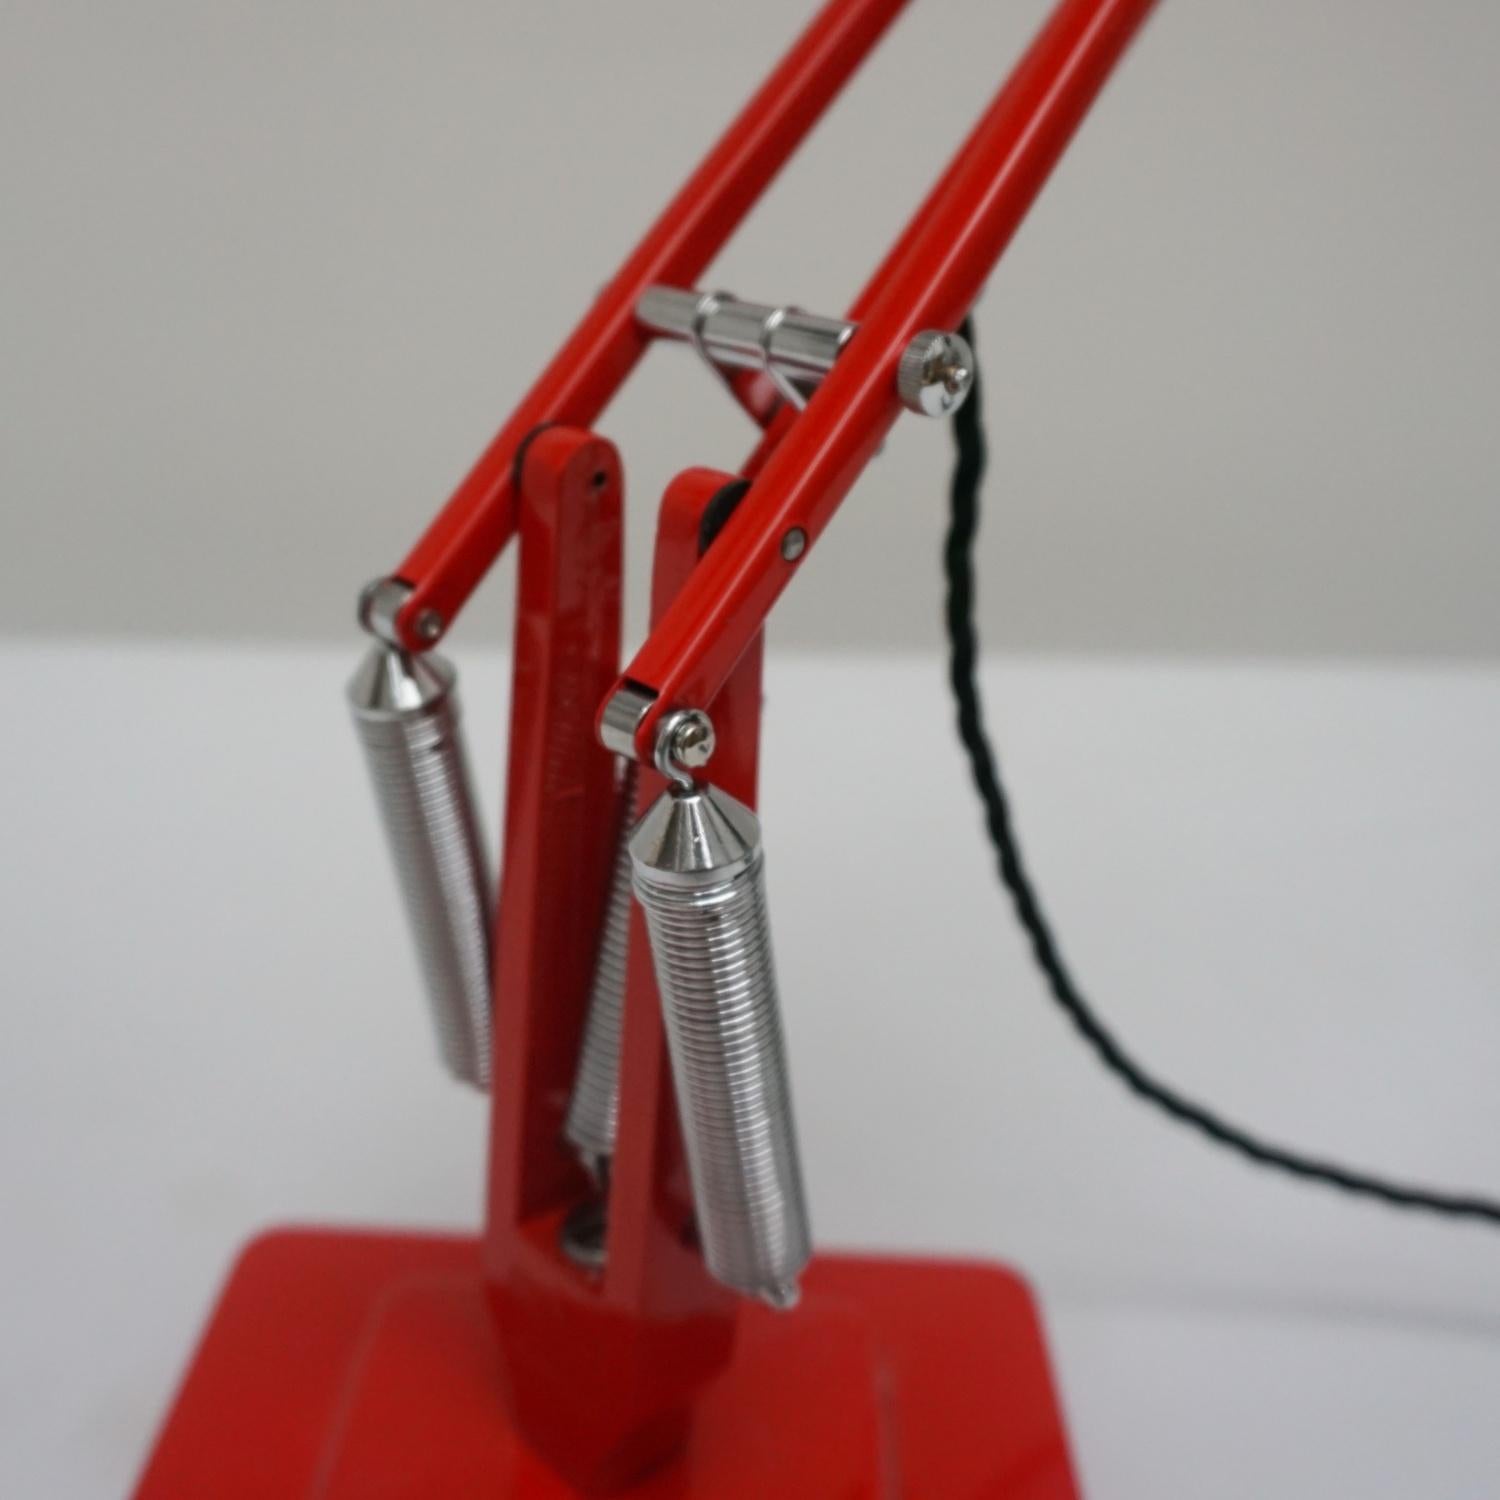 English Vintage Herbert Terry & Sons Repainted Red Anglepoise Desk Lamp